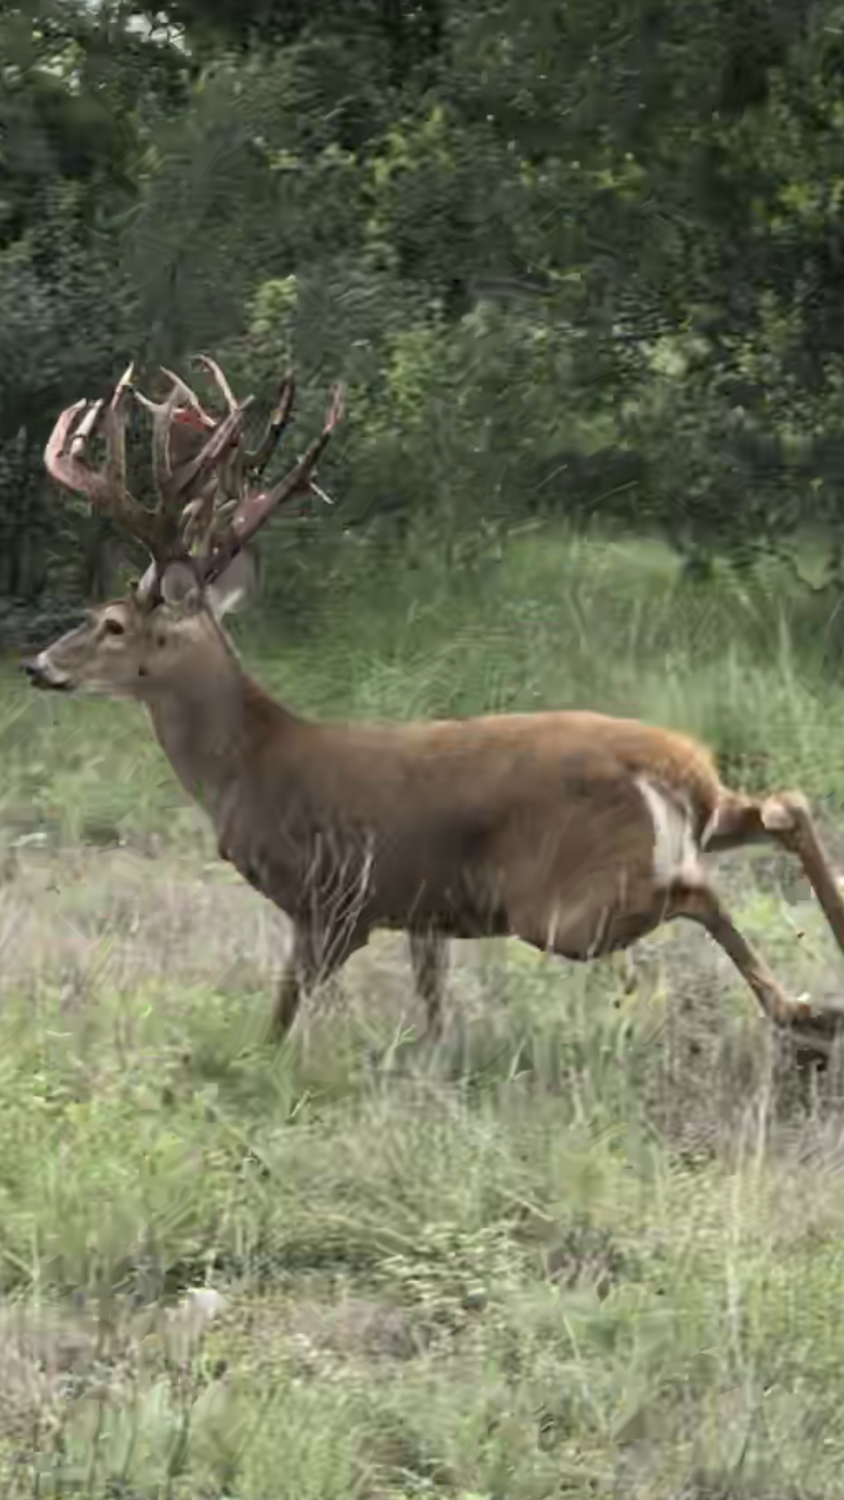 200 inch plus Trophy Whitetail Hunt - 2 day all inclusive